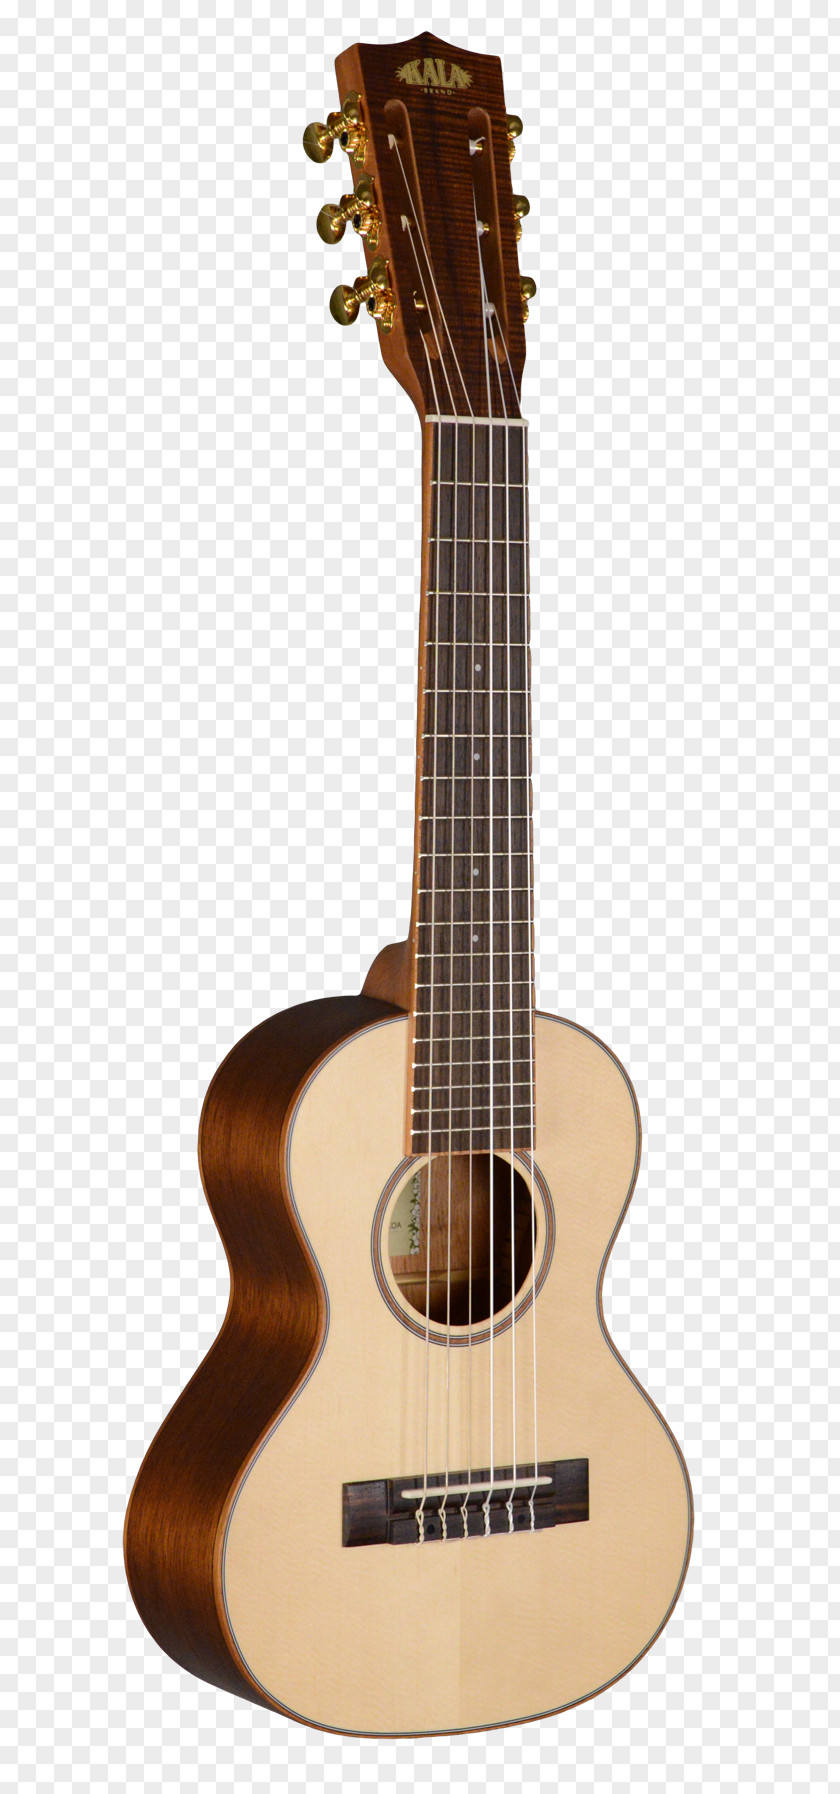 Guitar Ukulele Classical Acoustic Musical Instruments PNG